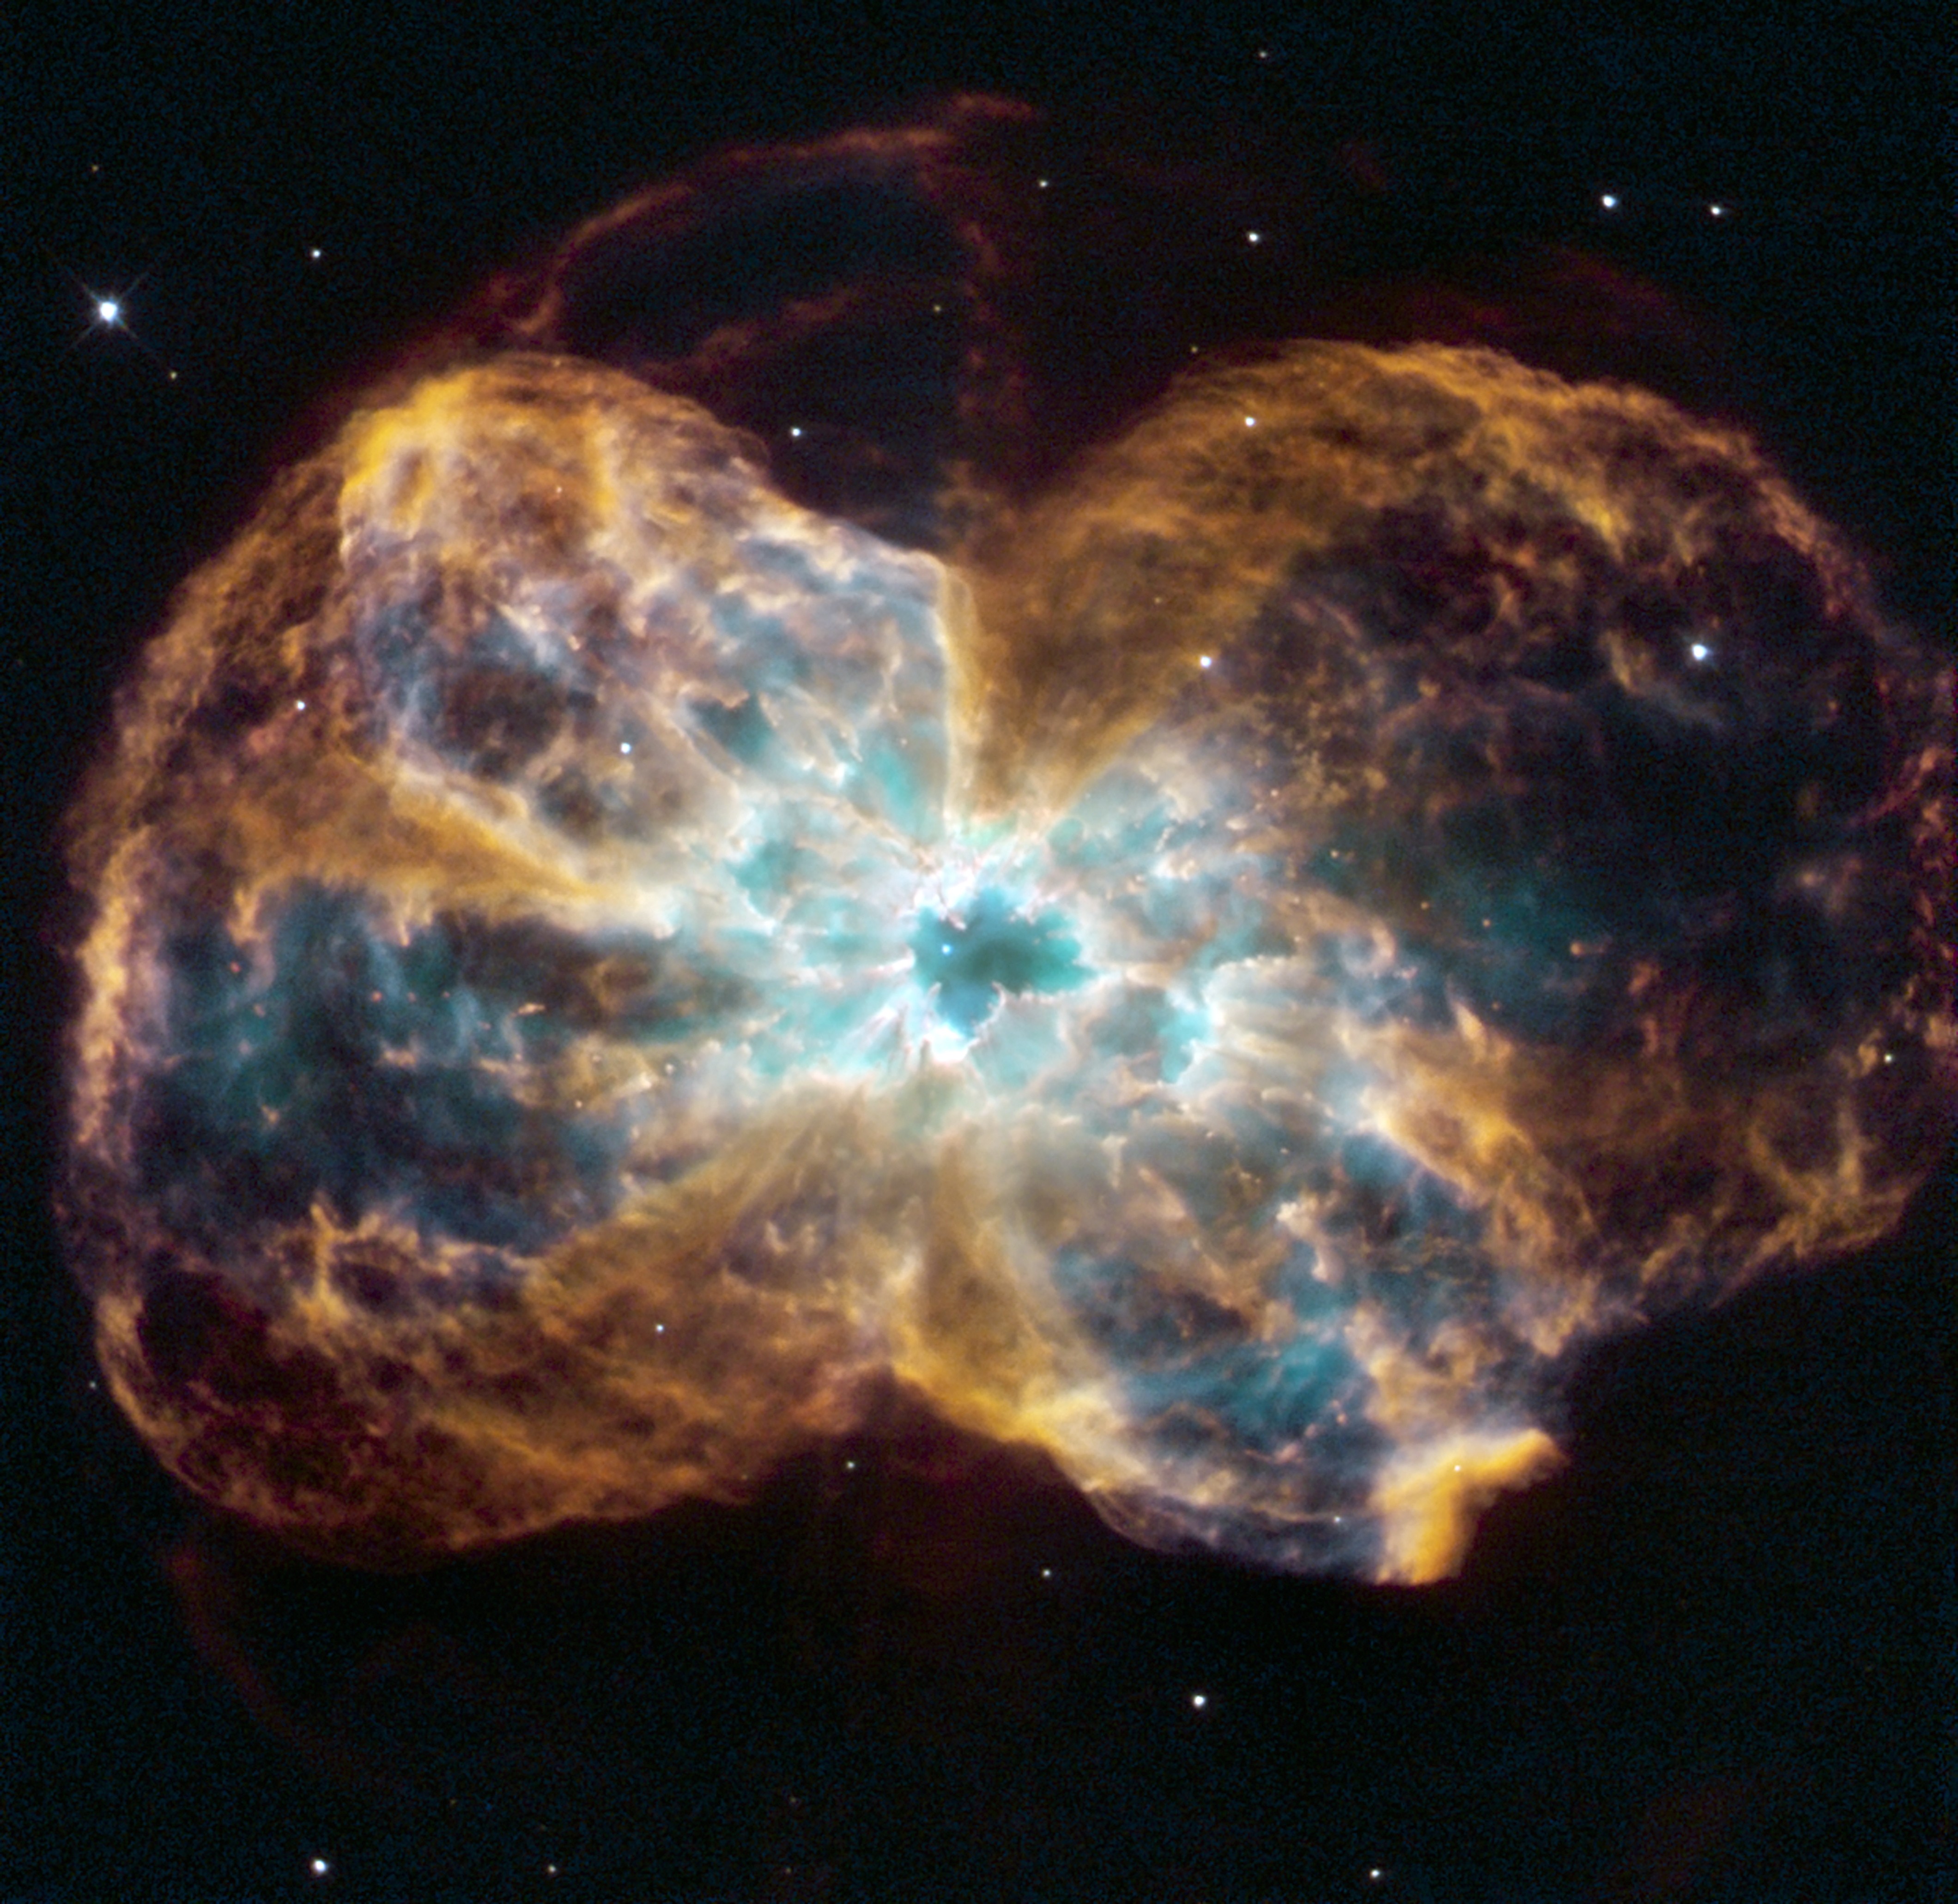 A burned-out star, called a white dwarf.